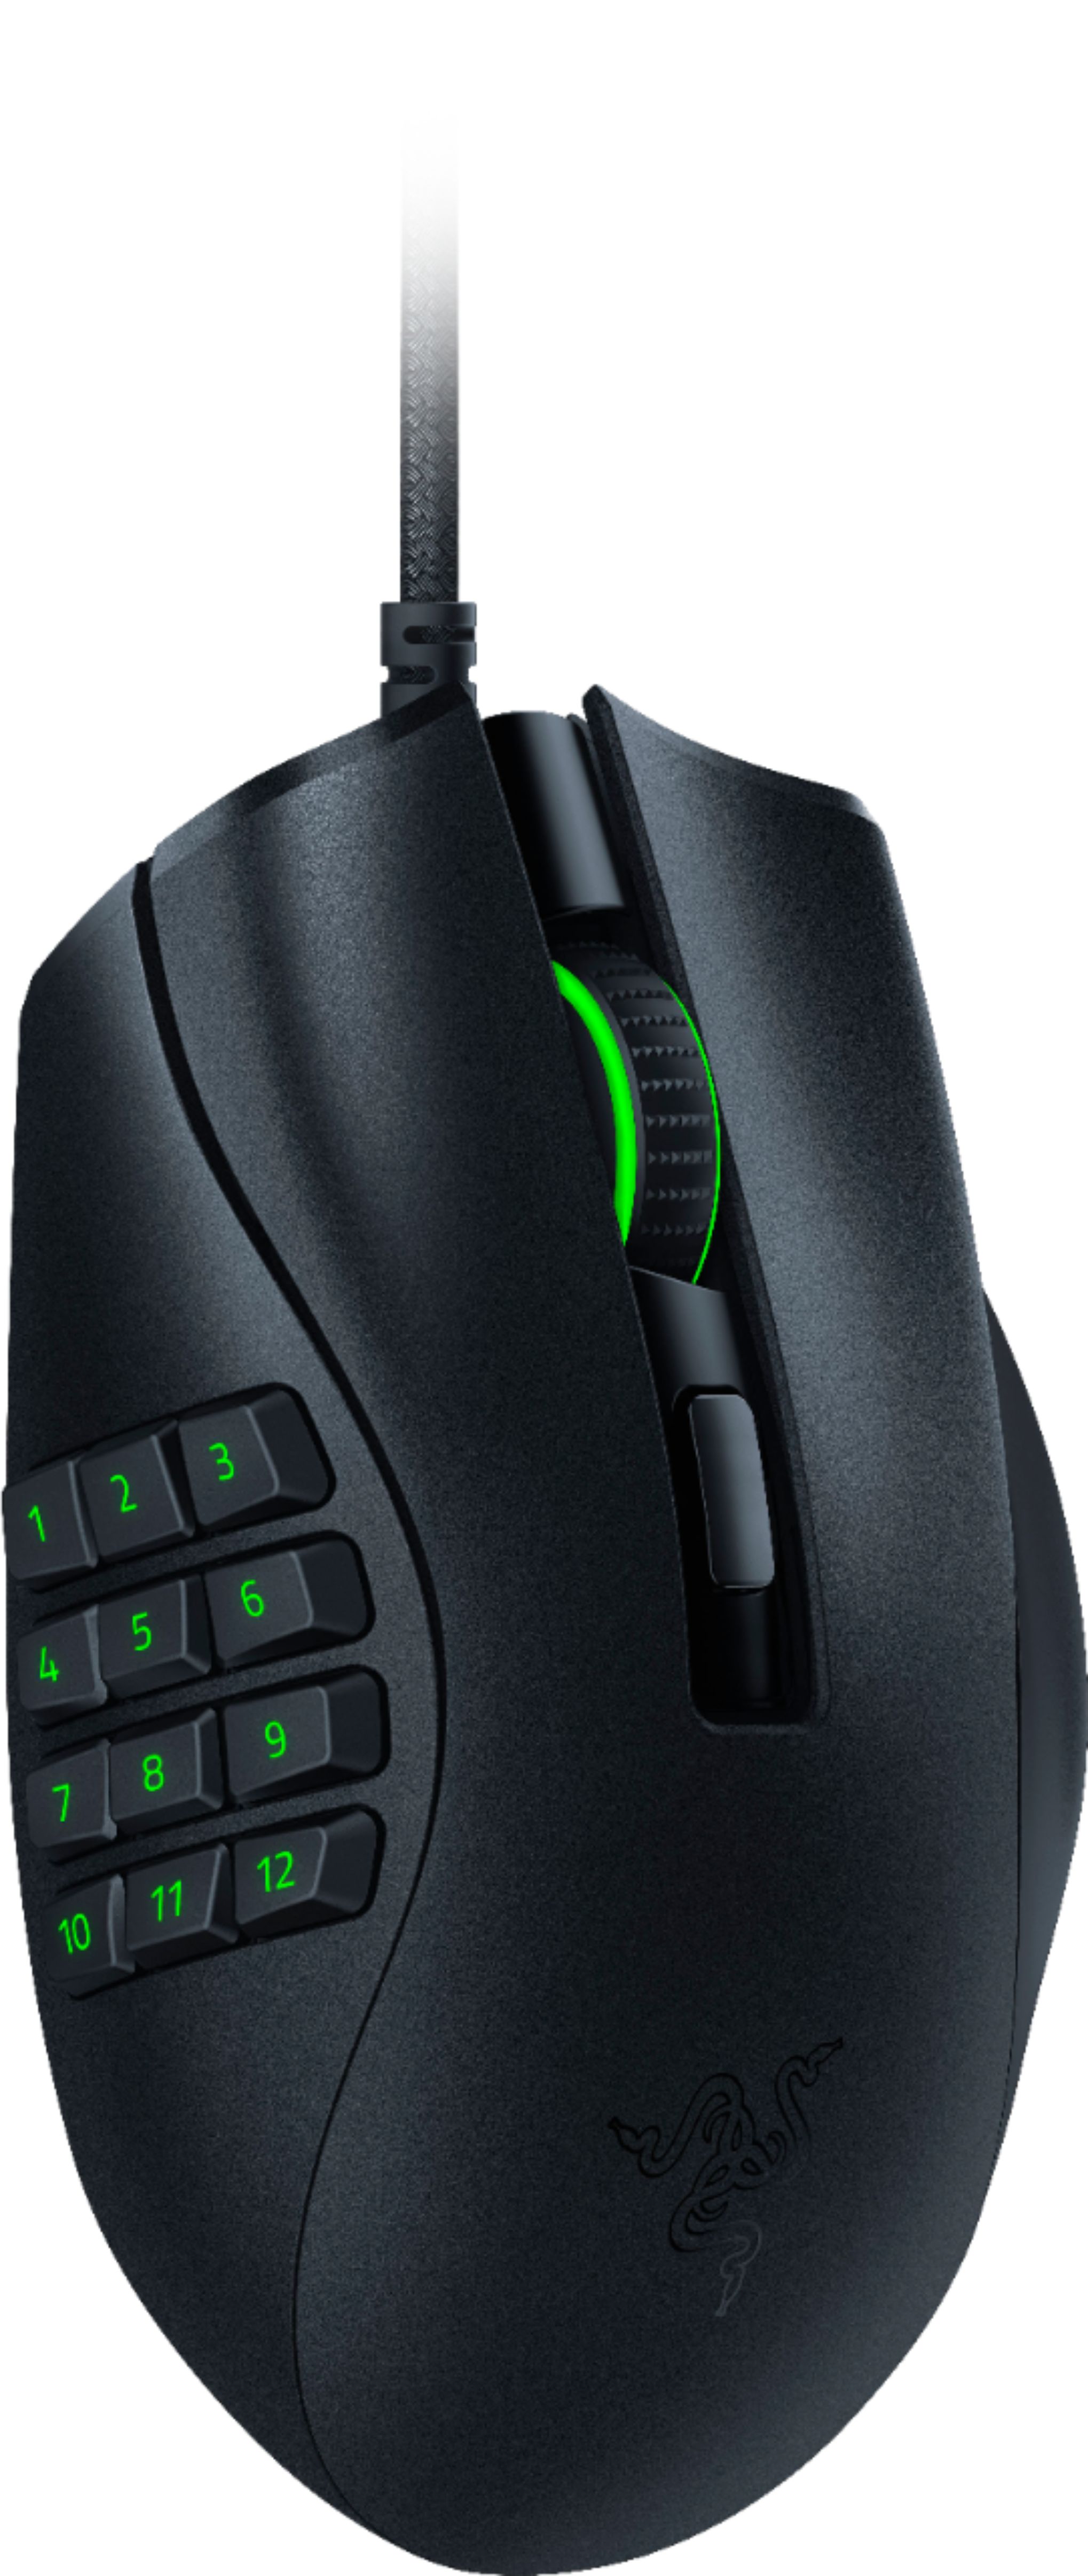 Razer Naga X Wired Optical Gaming Mouse with 16 Programmable Buttons Black  RZ01-03590100-R3U1 - Best Buy